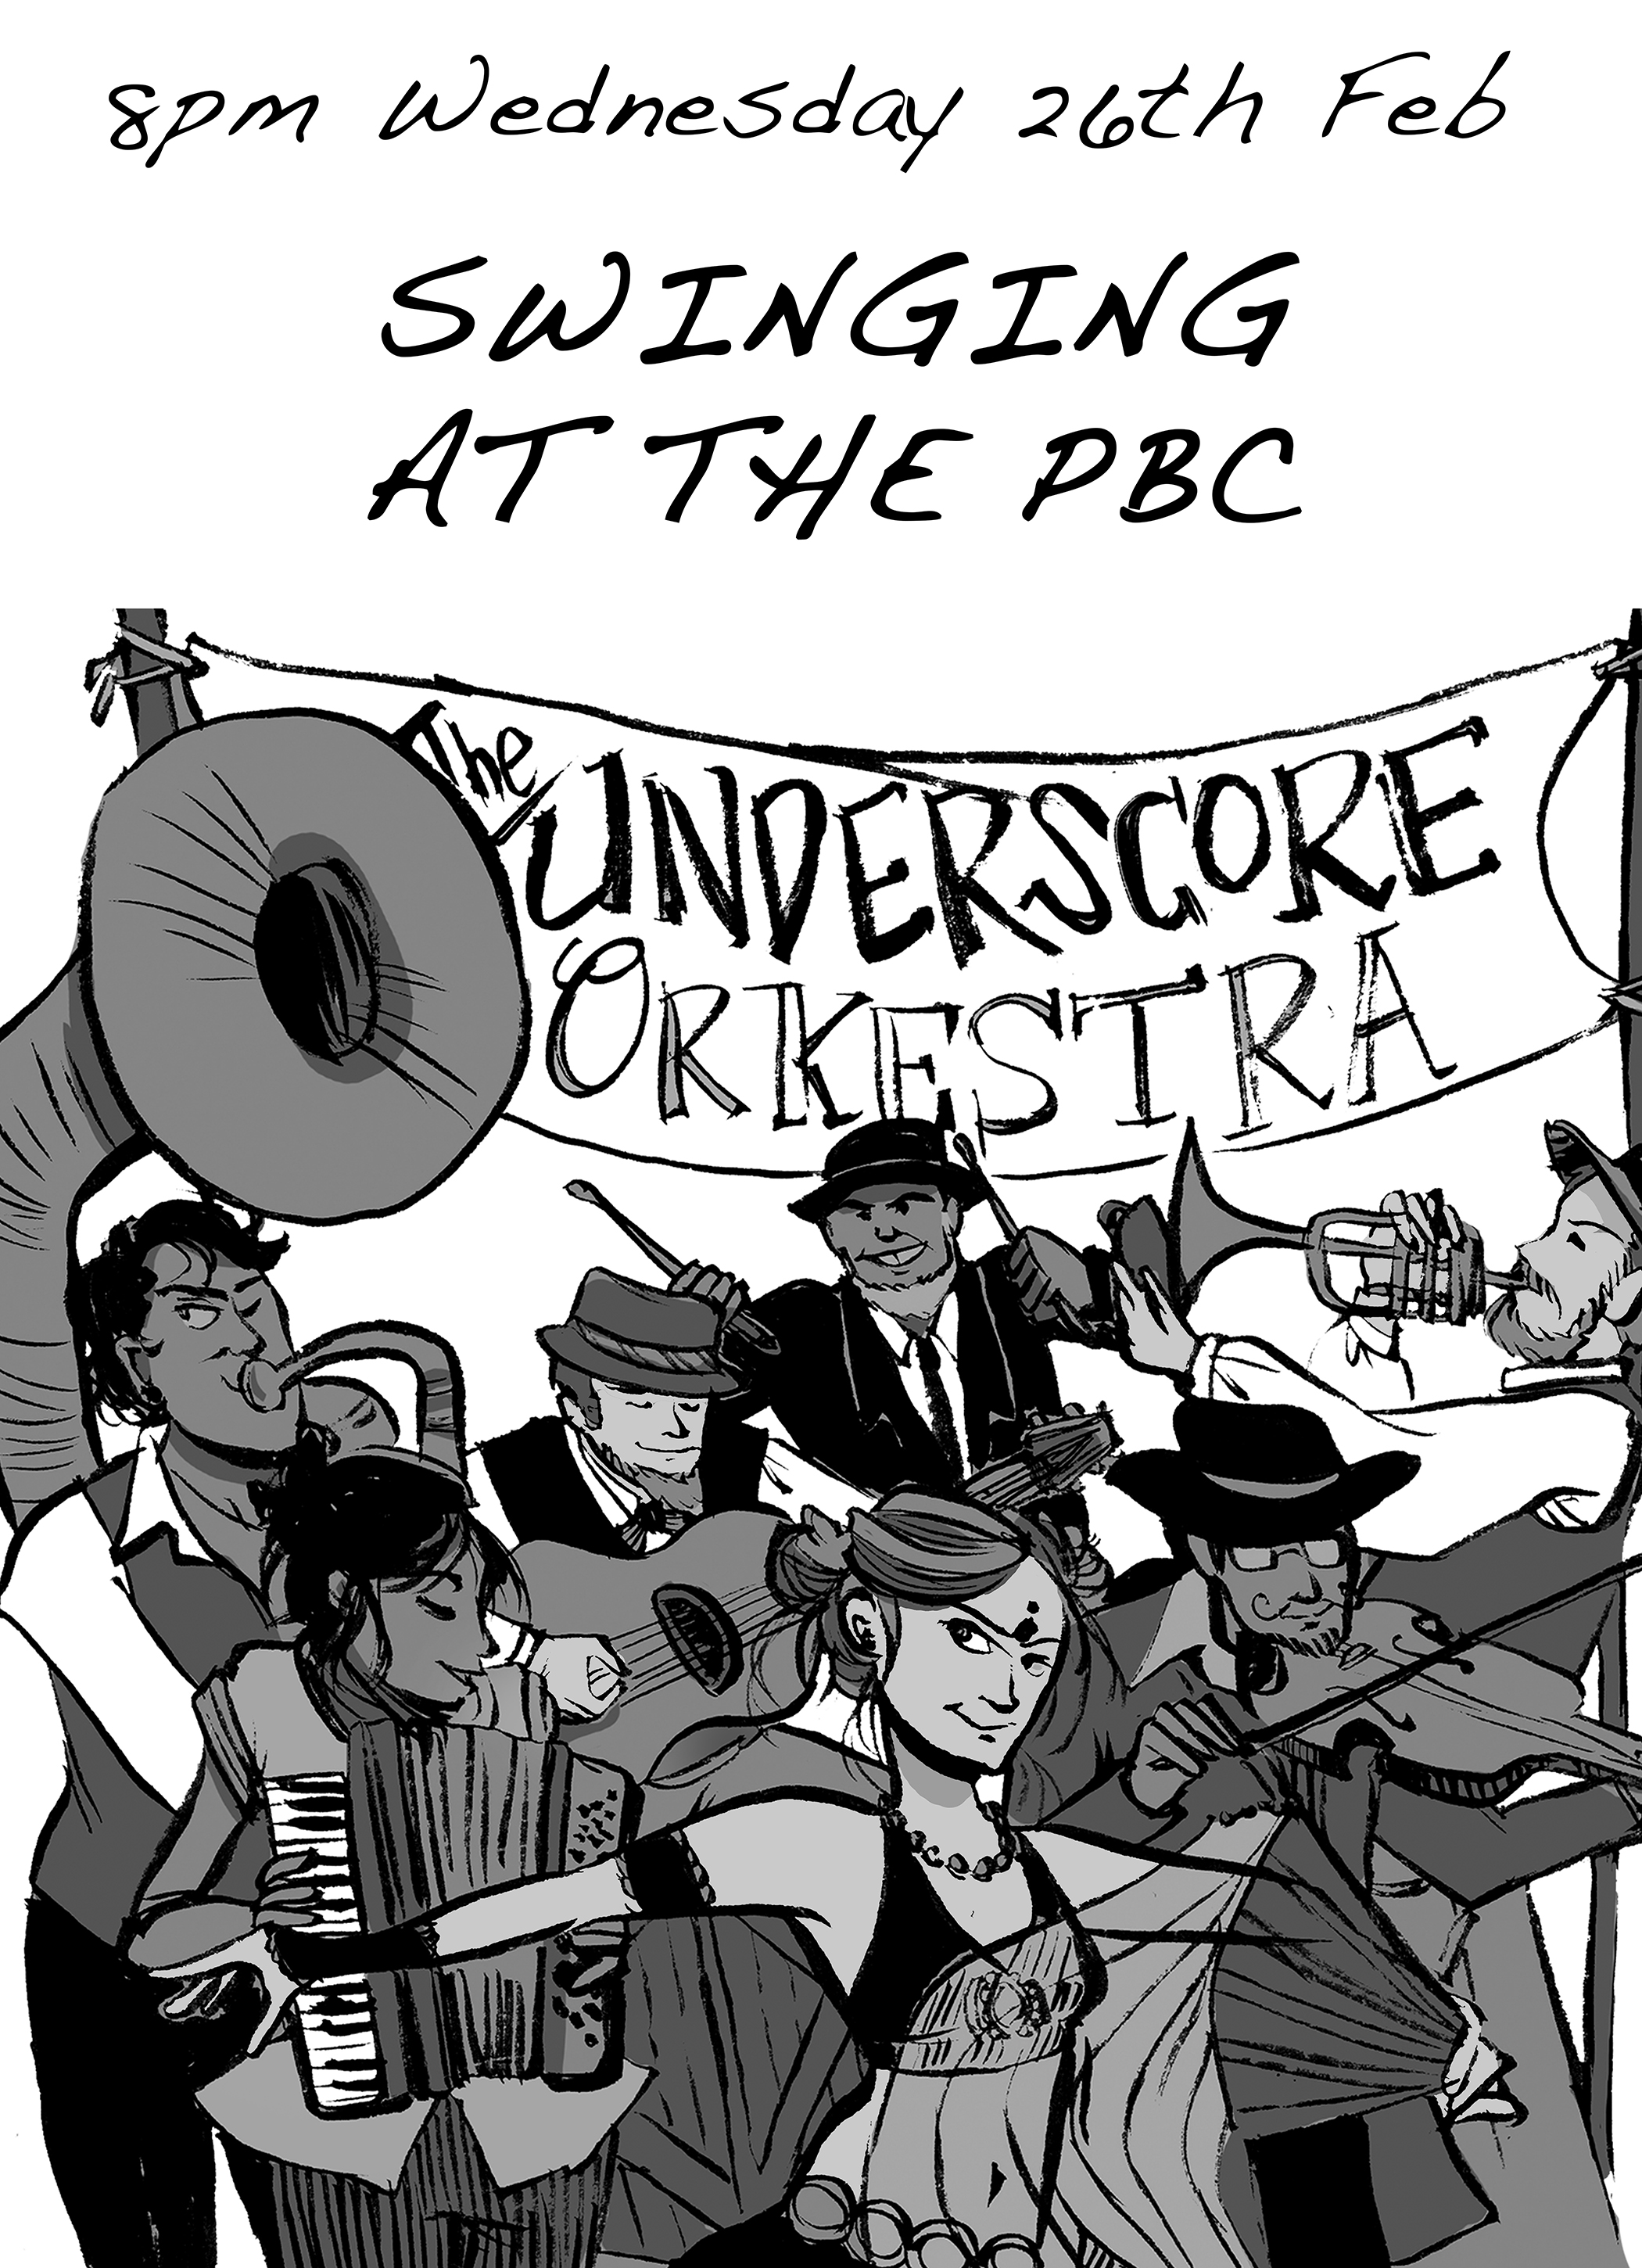 Swinging at the PBC with the Underscore Orkestra